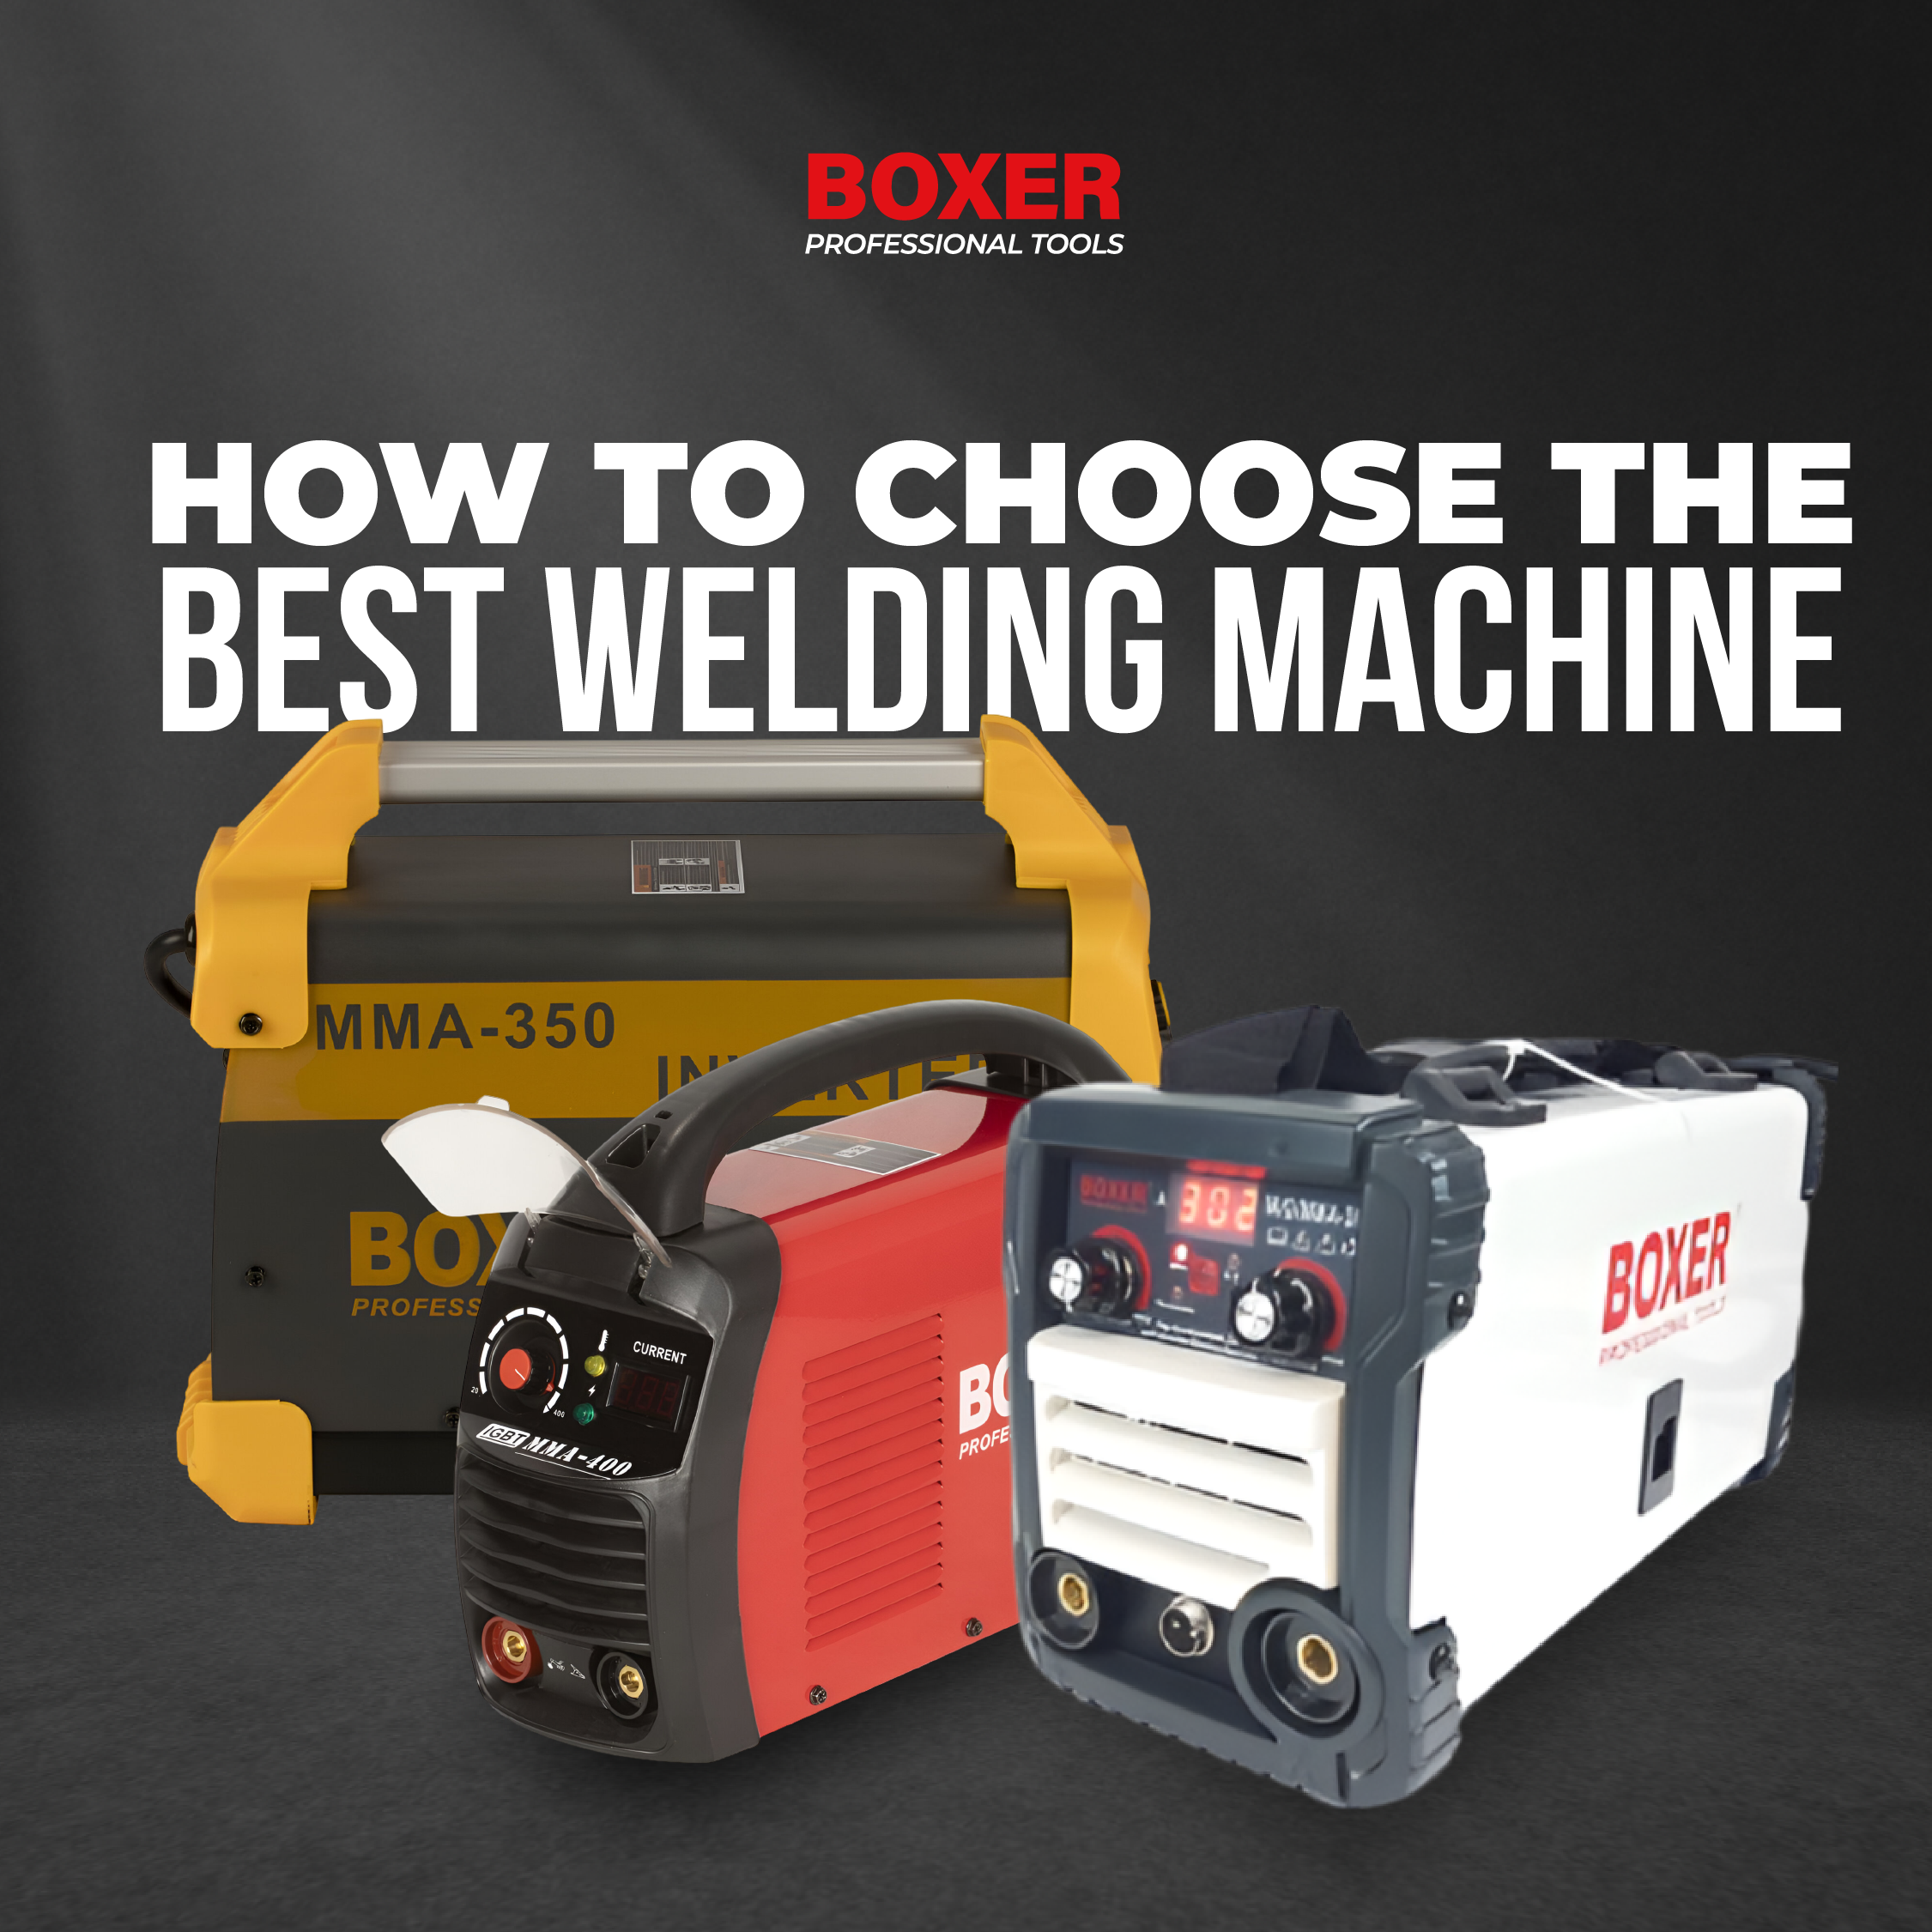 How to Choose the Best Welding Machine